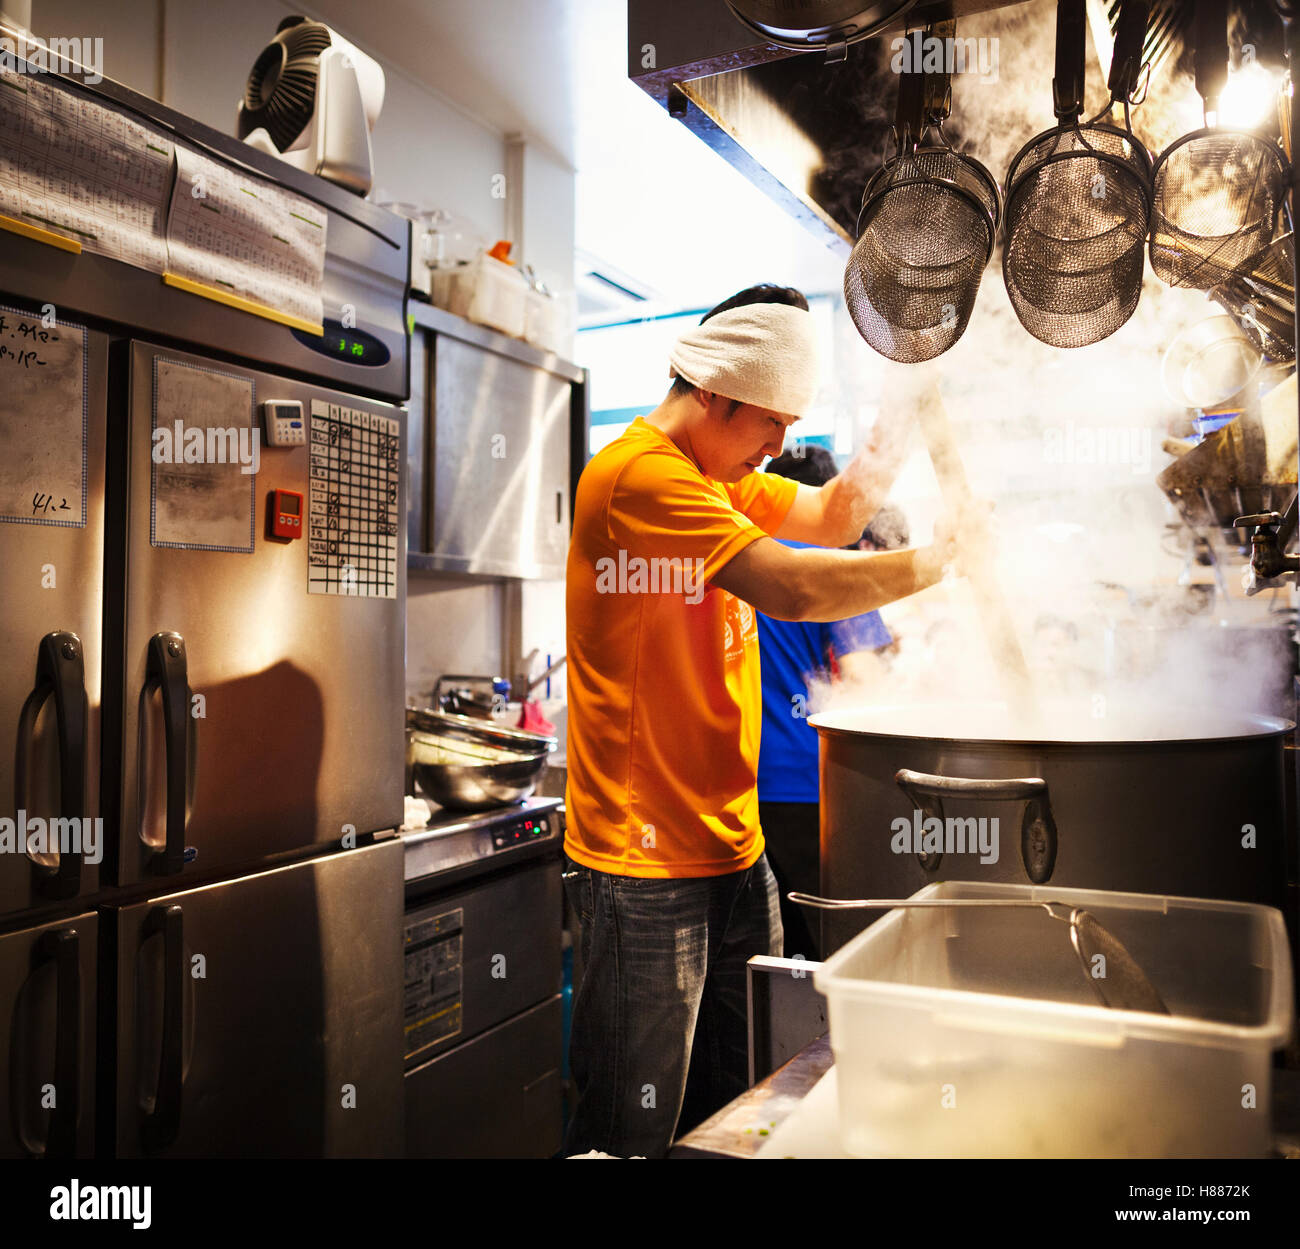 The ramen noodle shop, staff preparing food. Two men stirring a vat of noodles. Steam rising, heat, cooking, bandana small kitchen Stock Photo